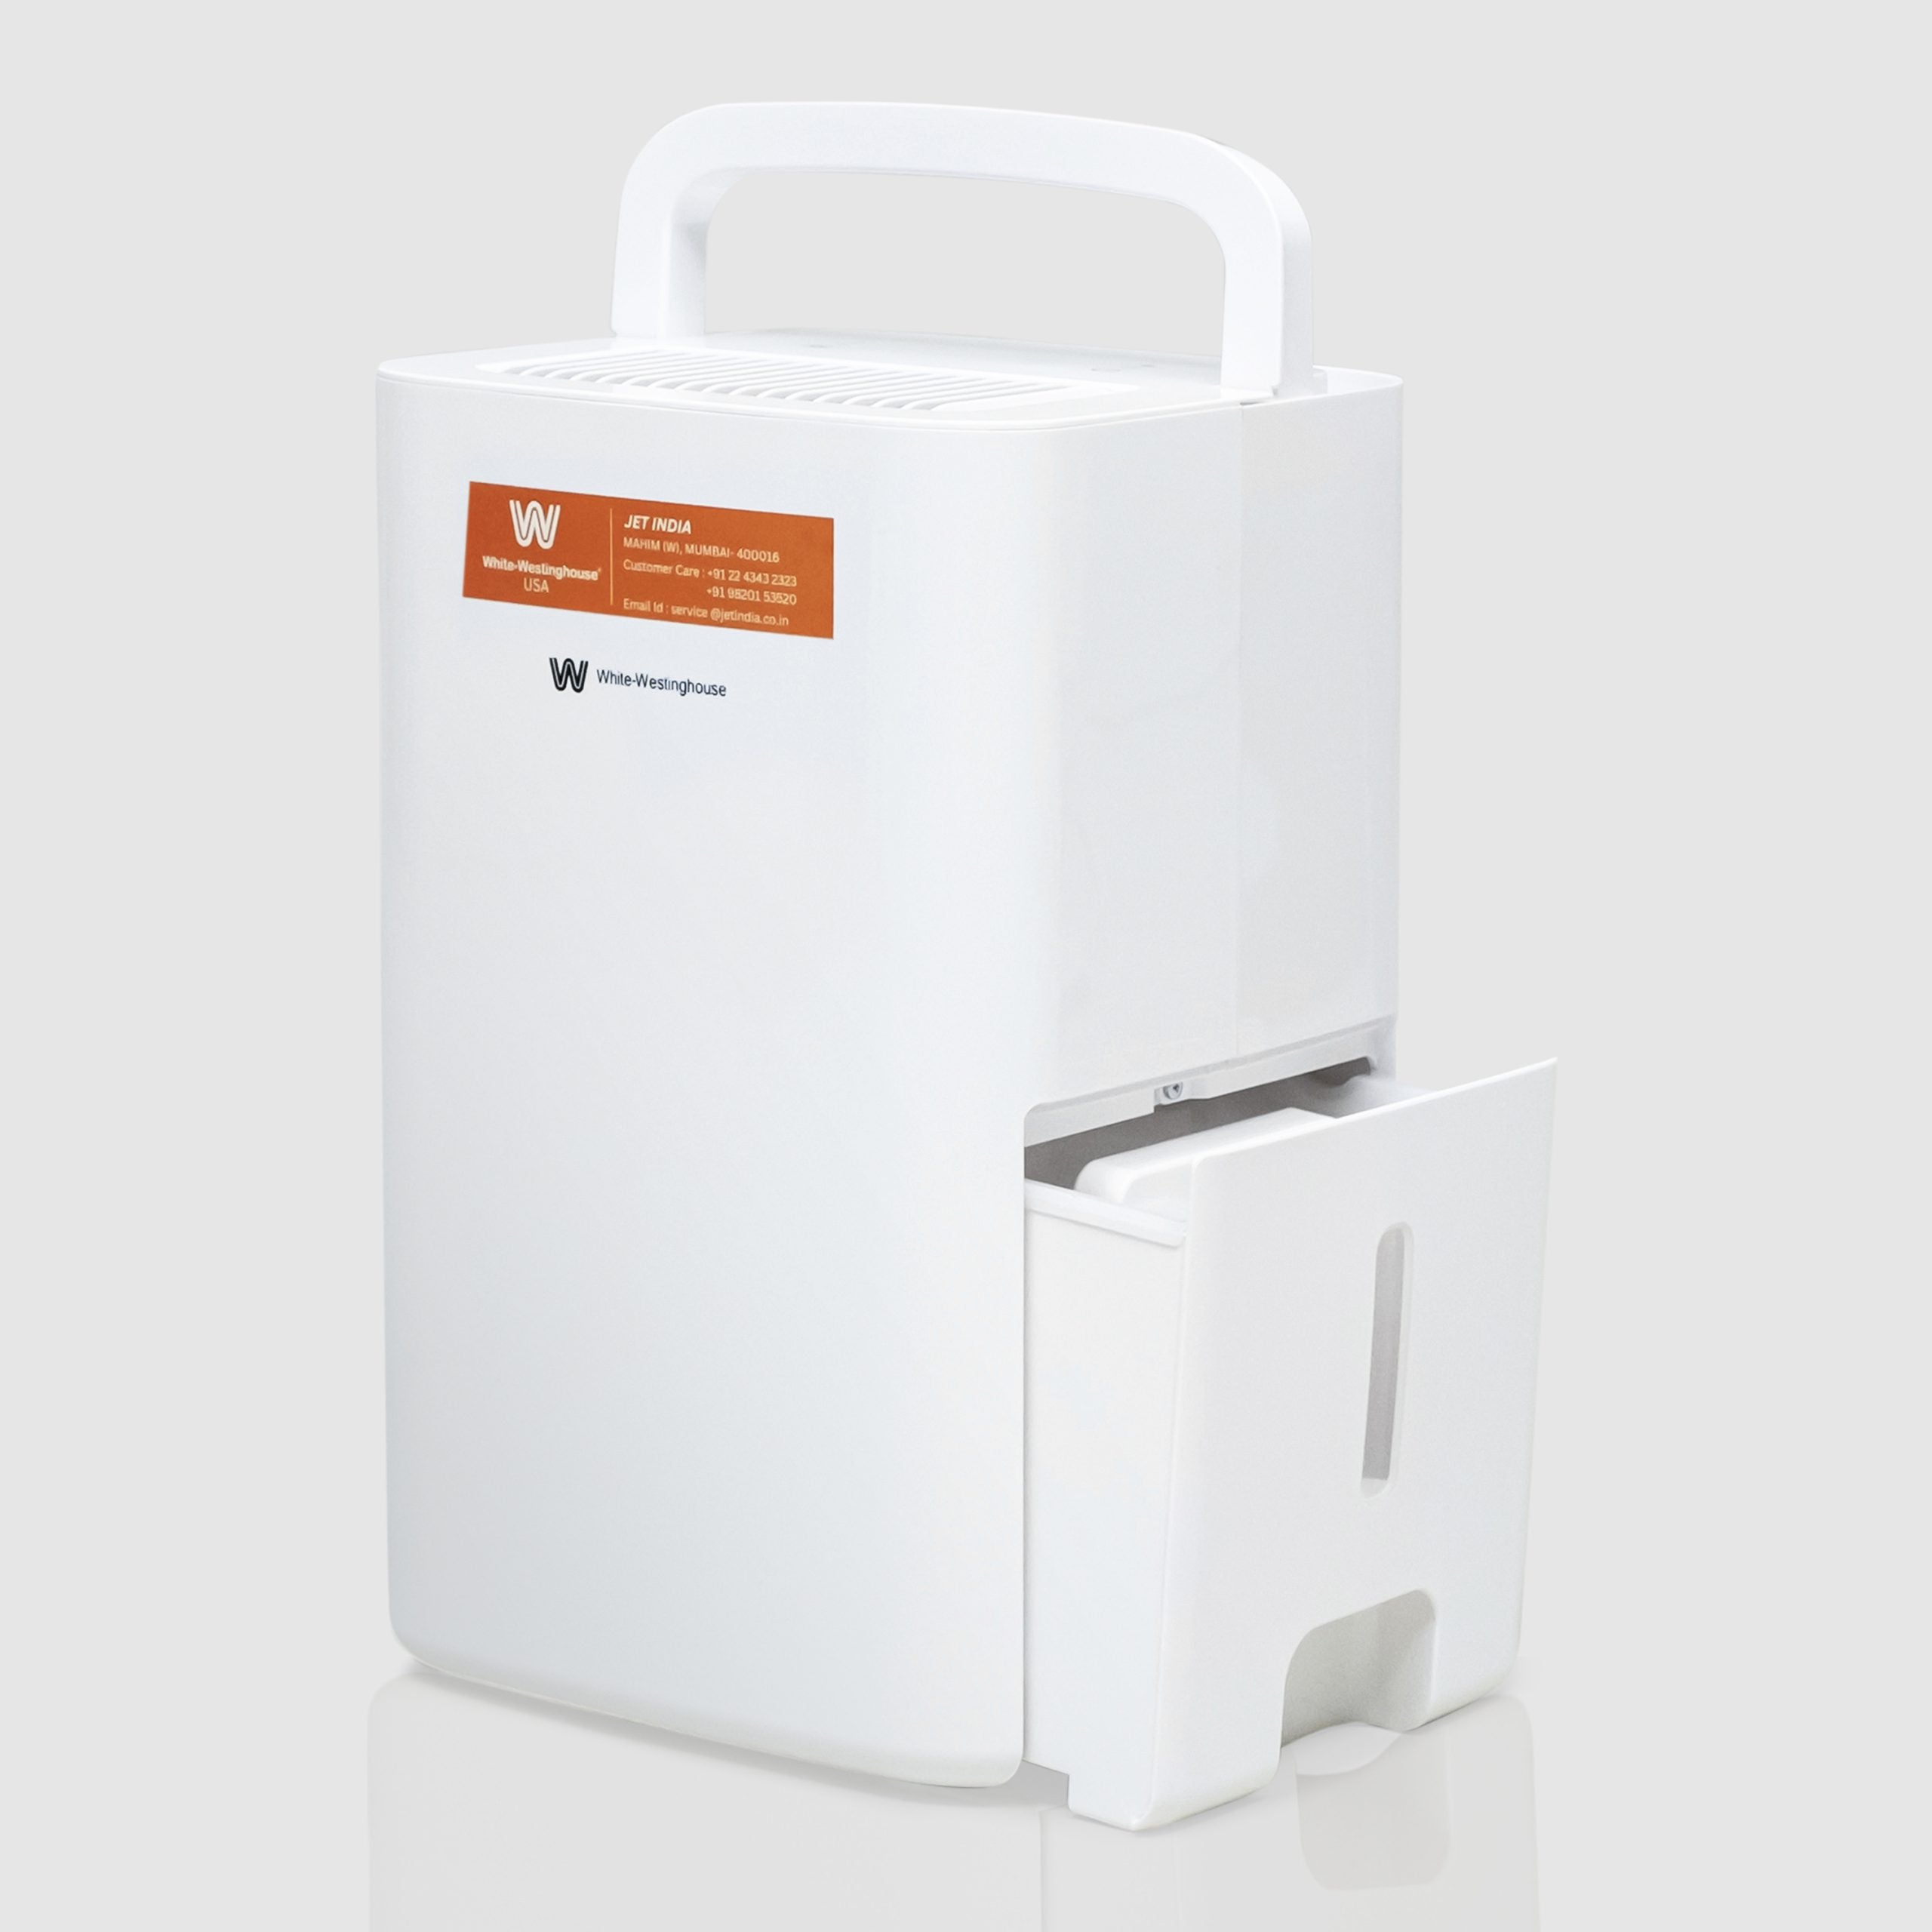 Angled view of the White Westinghouse Dehumidifier AWHD123L with the water tank partially removed, showcasing the built-in handle and sleek white design. The unit is ideal for maintaining optimal humidity levels in residential and commercial spaces.